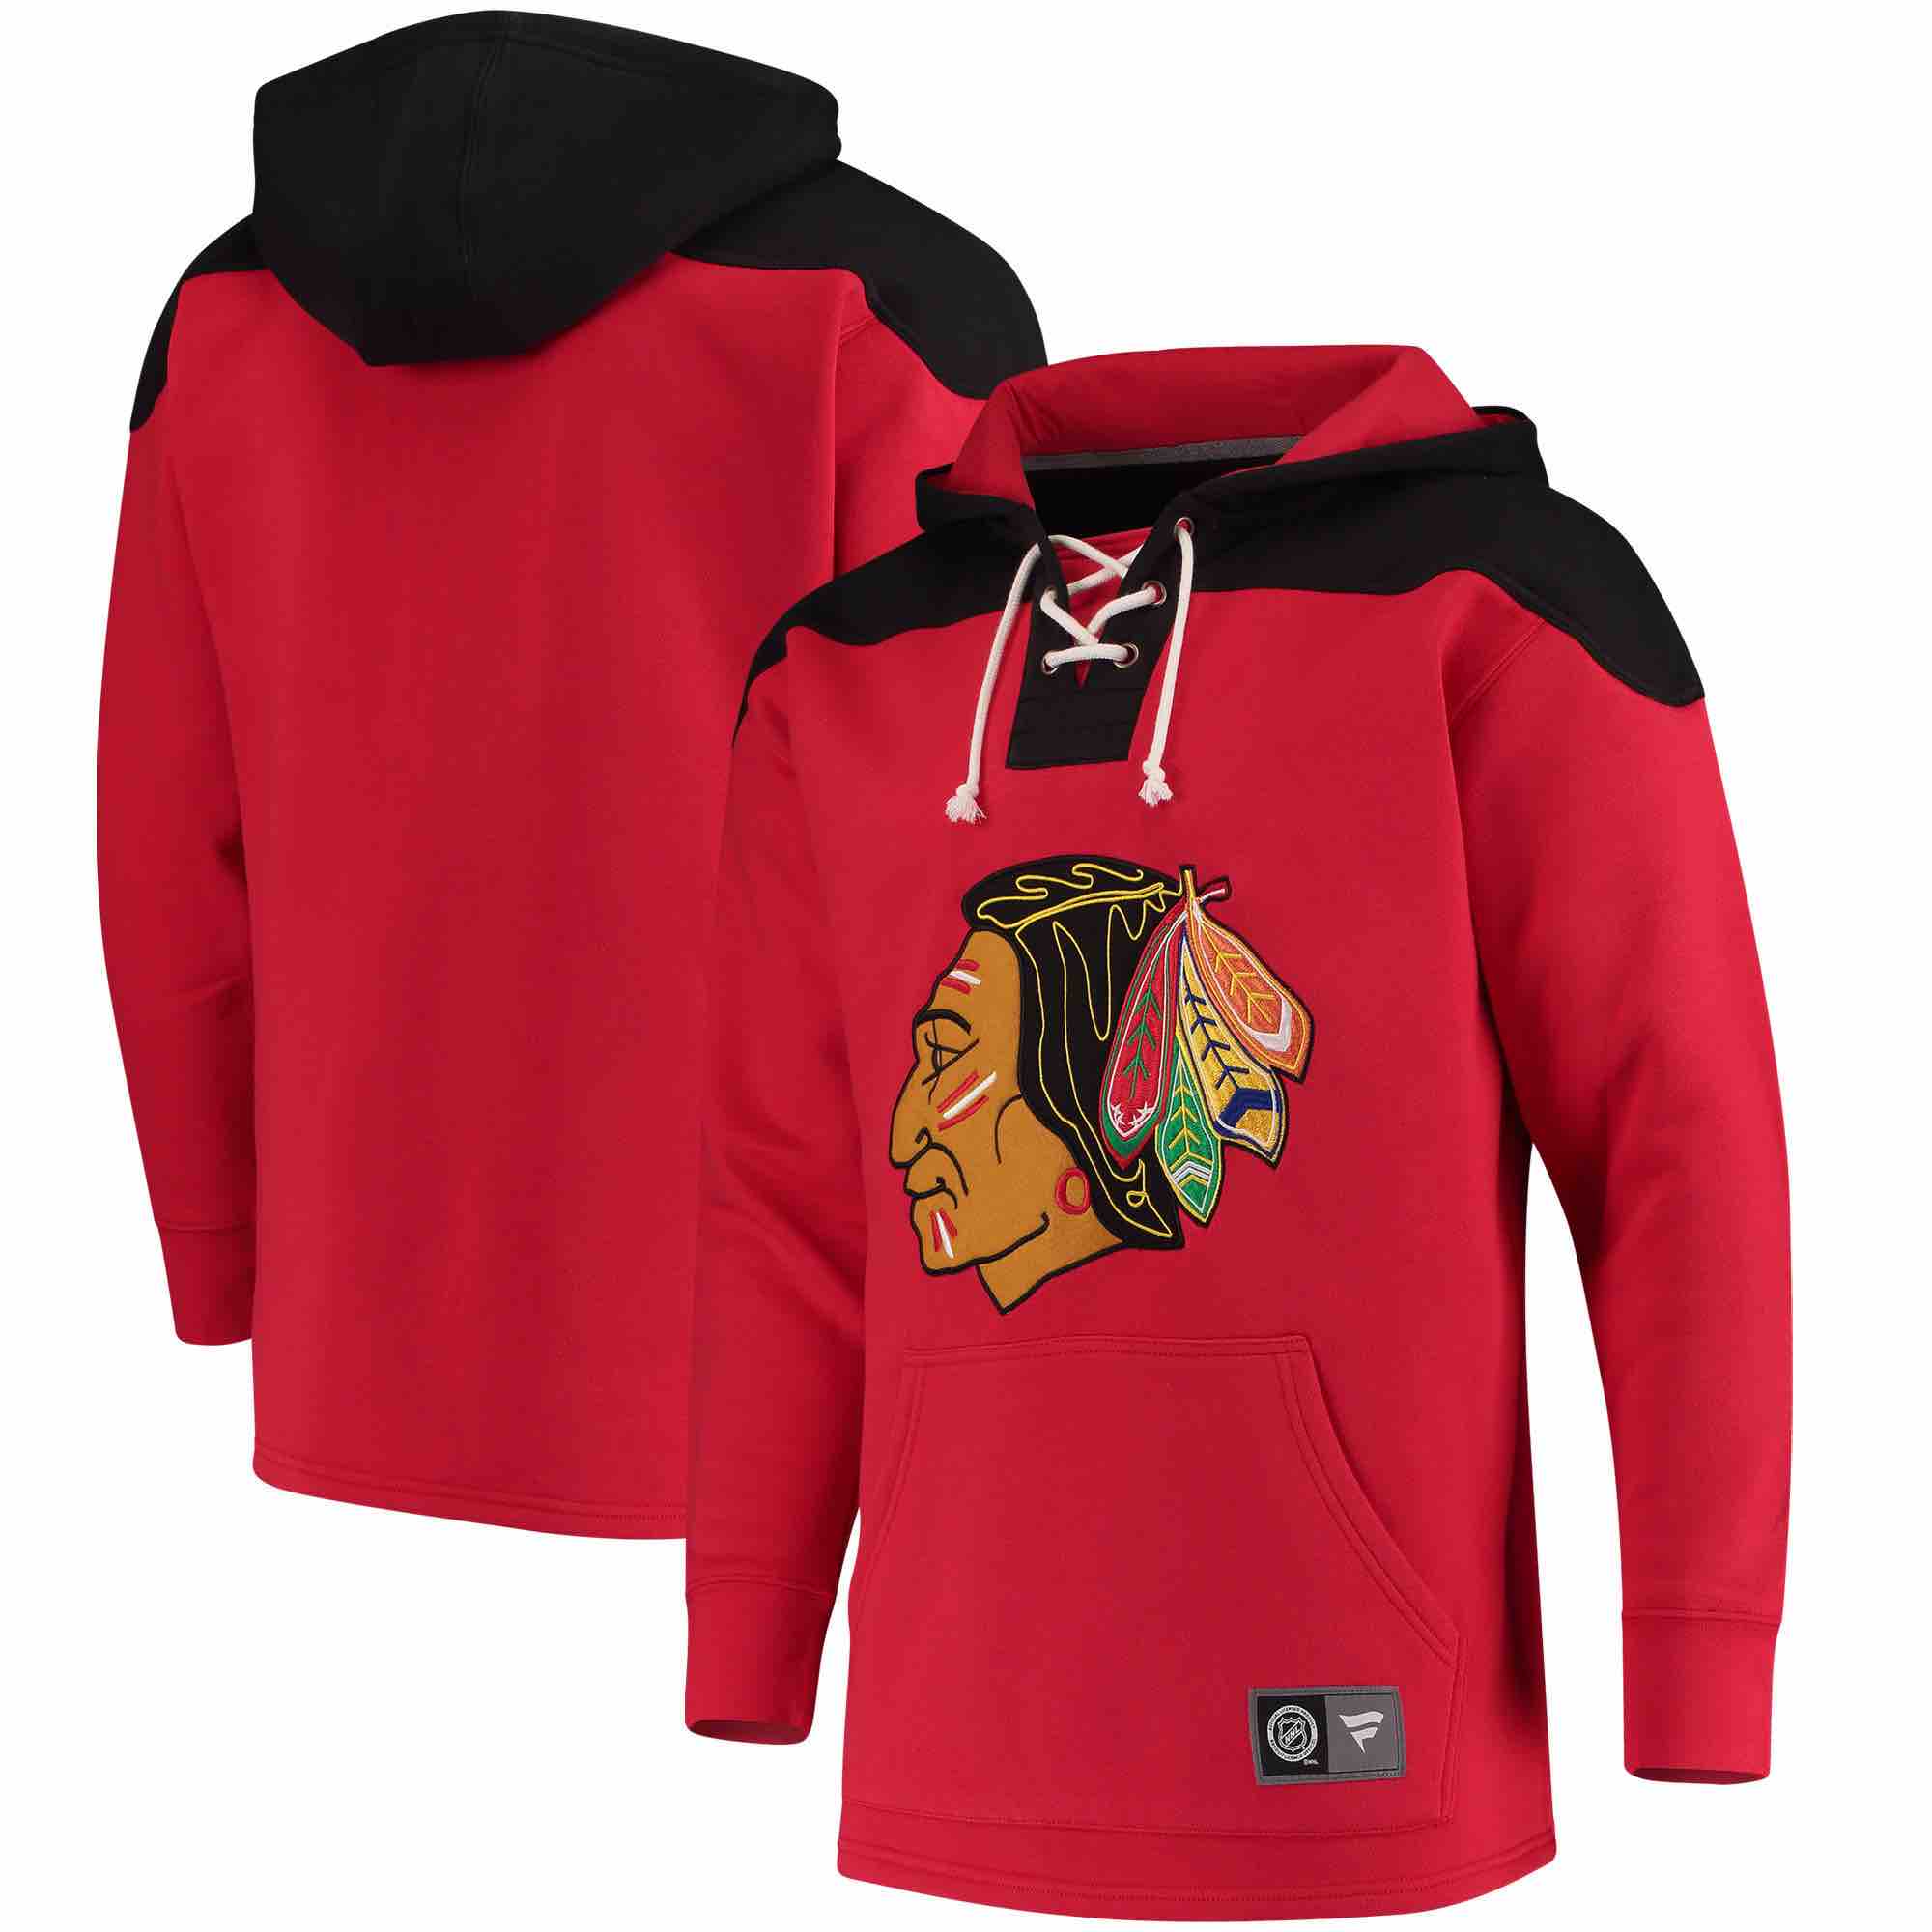 NHL Chicago Blackhawks Red Personalized Hoodie